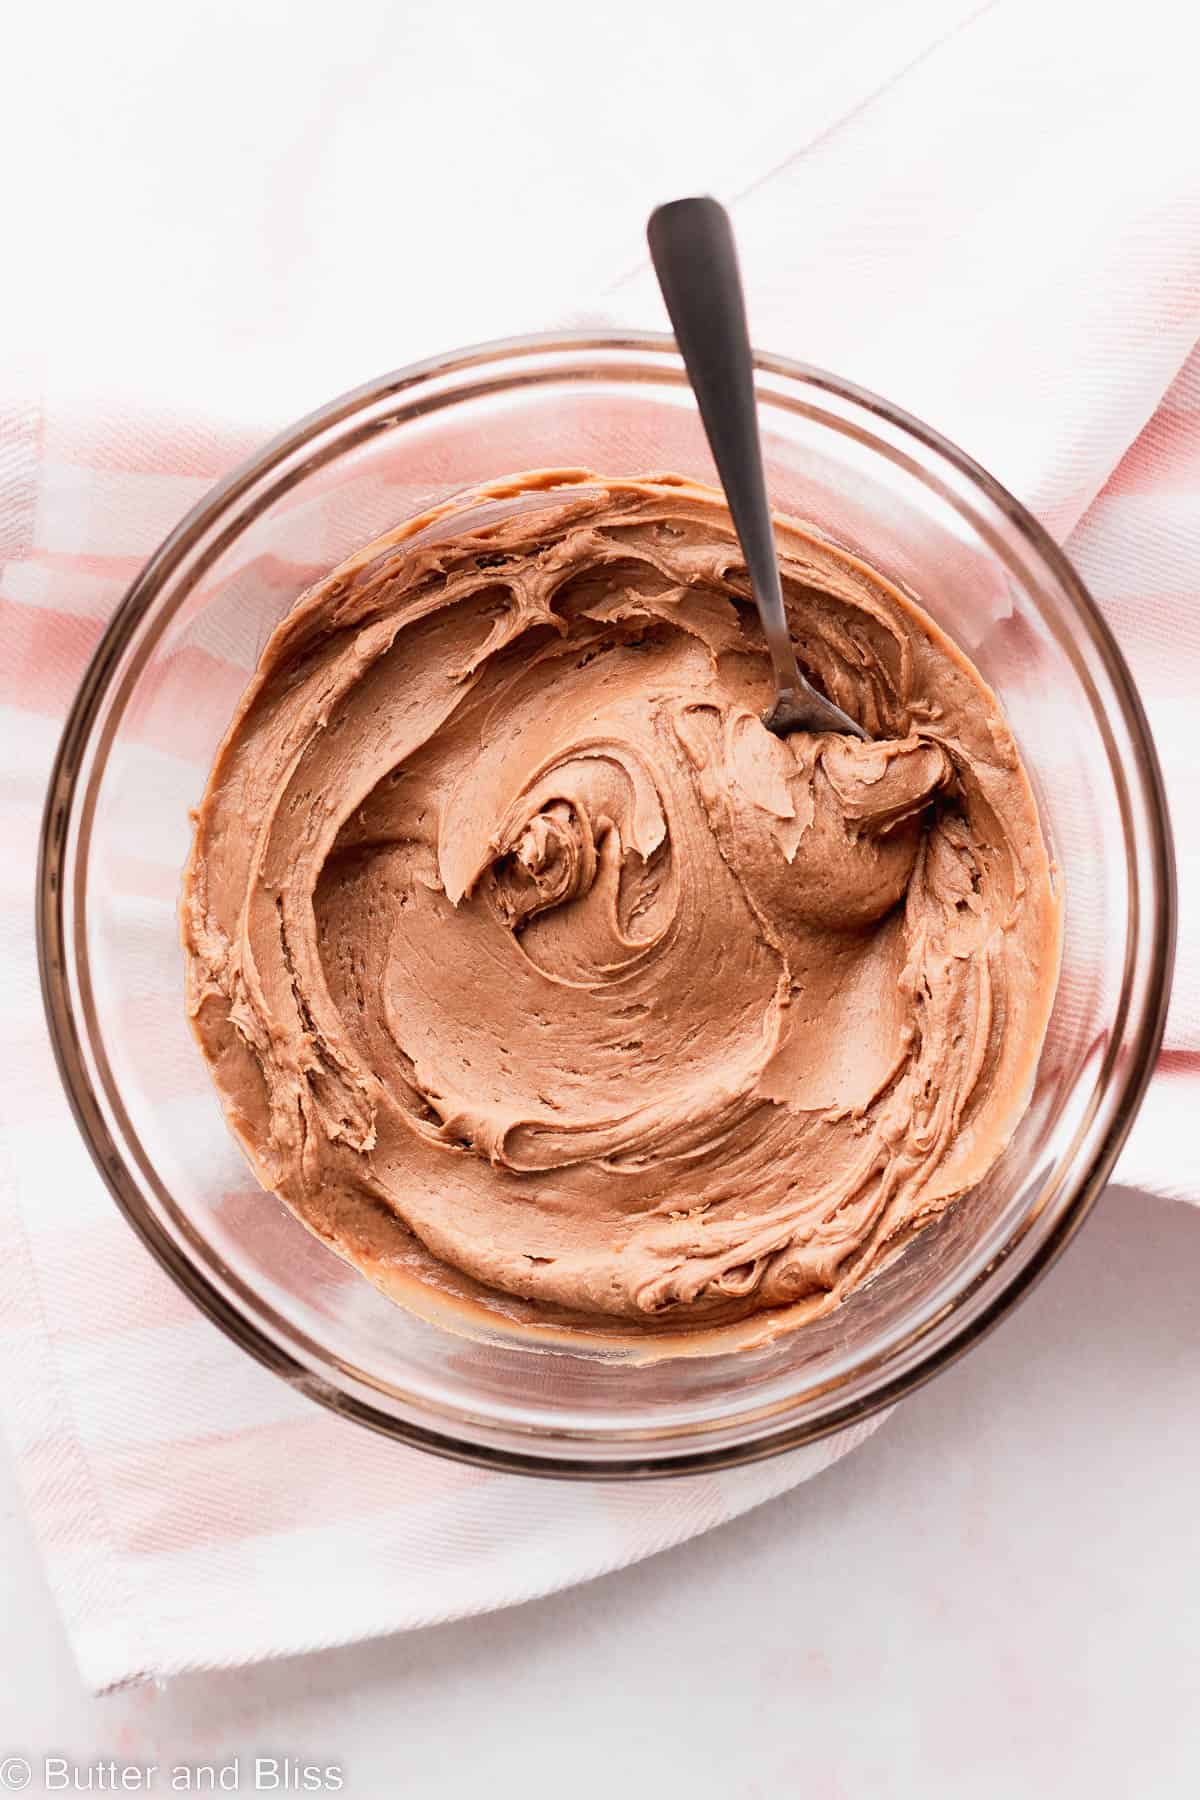 Ultra rich and creamy chocolate fudge frosting swirled in a small glass bowl on a table.